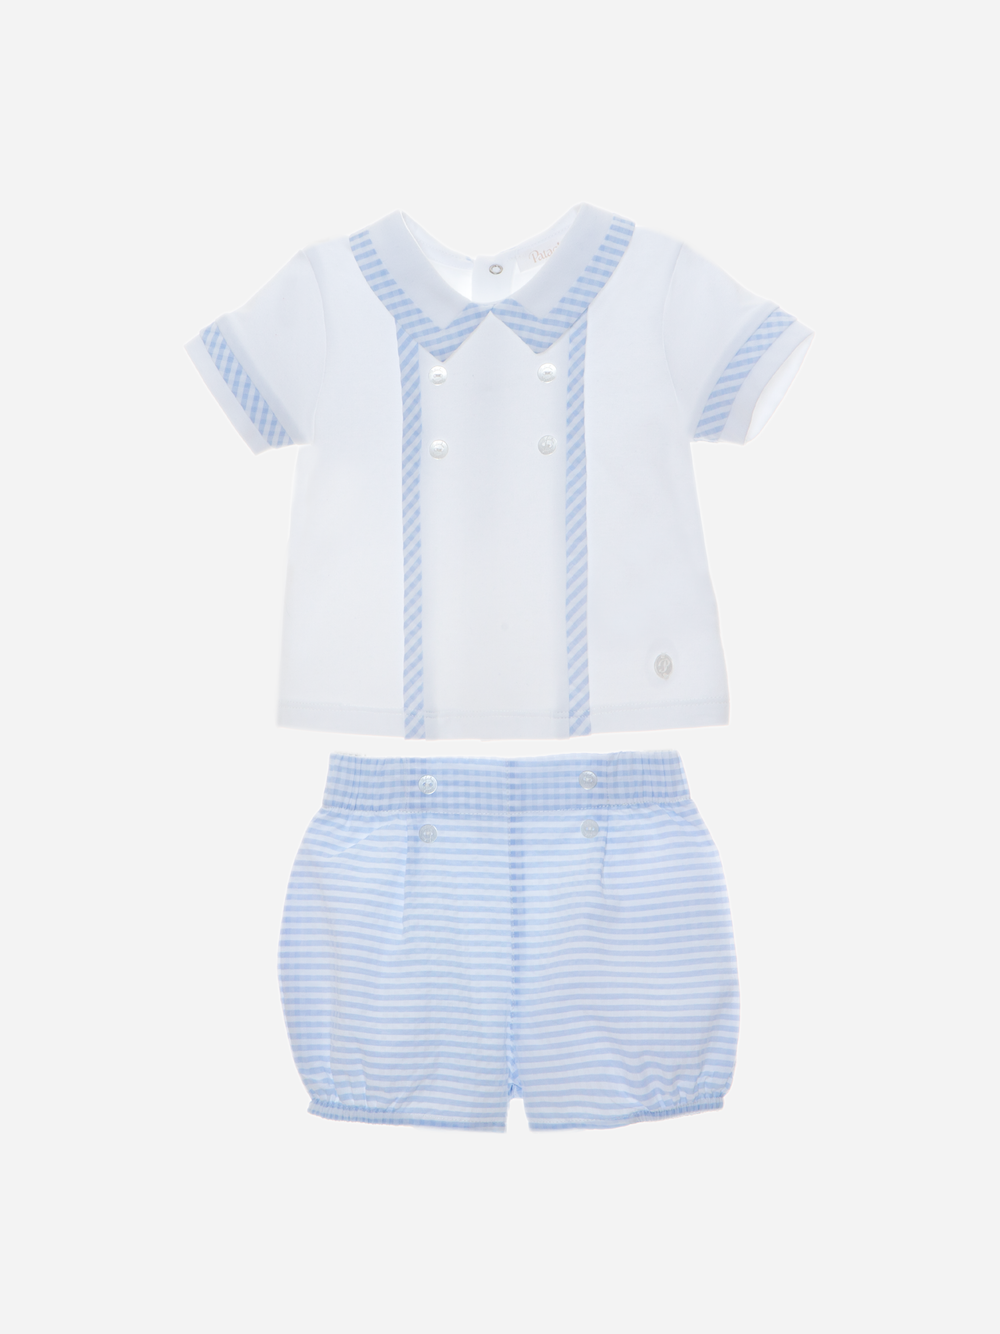  Baby boy blue set with checkered pattern